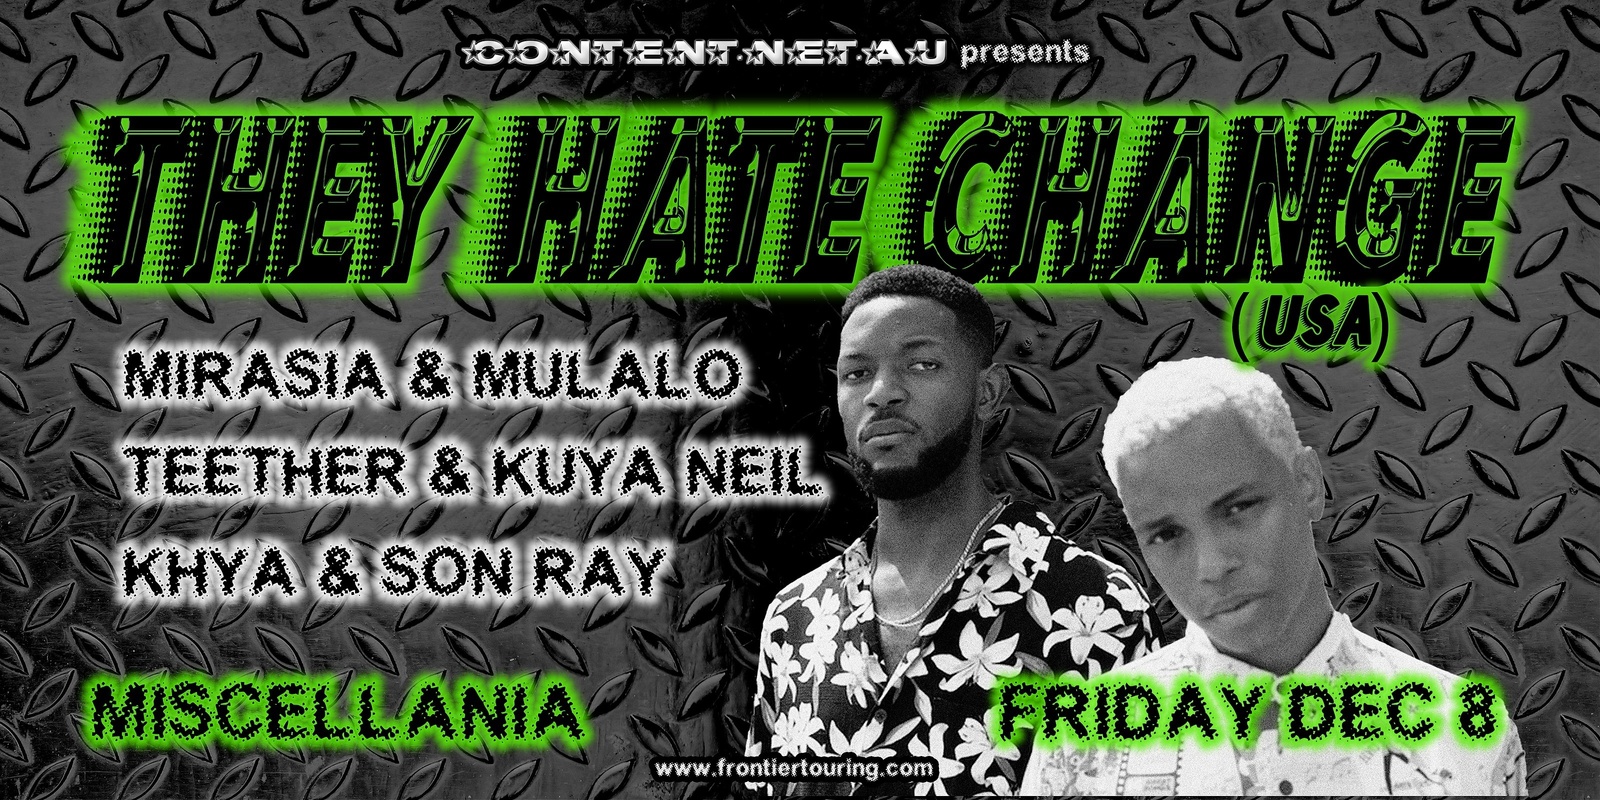 Banner image for CONTENT.NET.AU presents They Hate Change (USA) w/ Mulalo & Mirasia (MC set), Teether & Kuya Neil, Khya & Son Ray